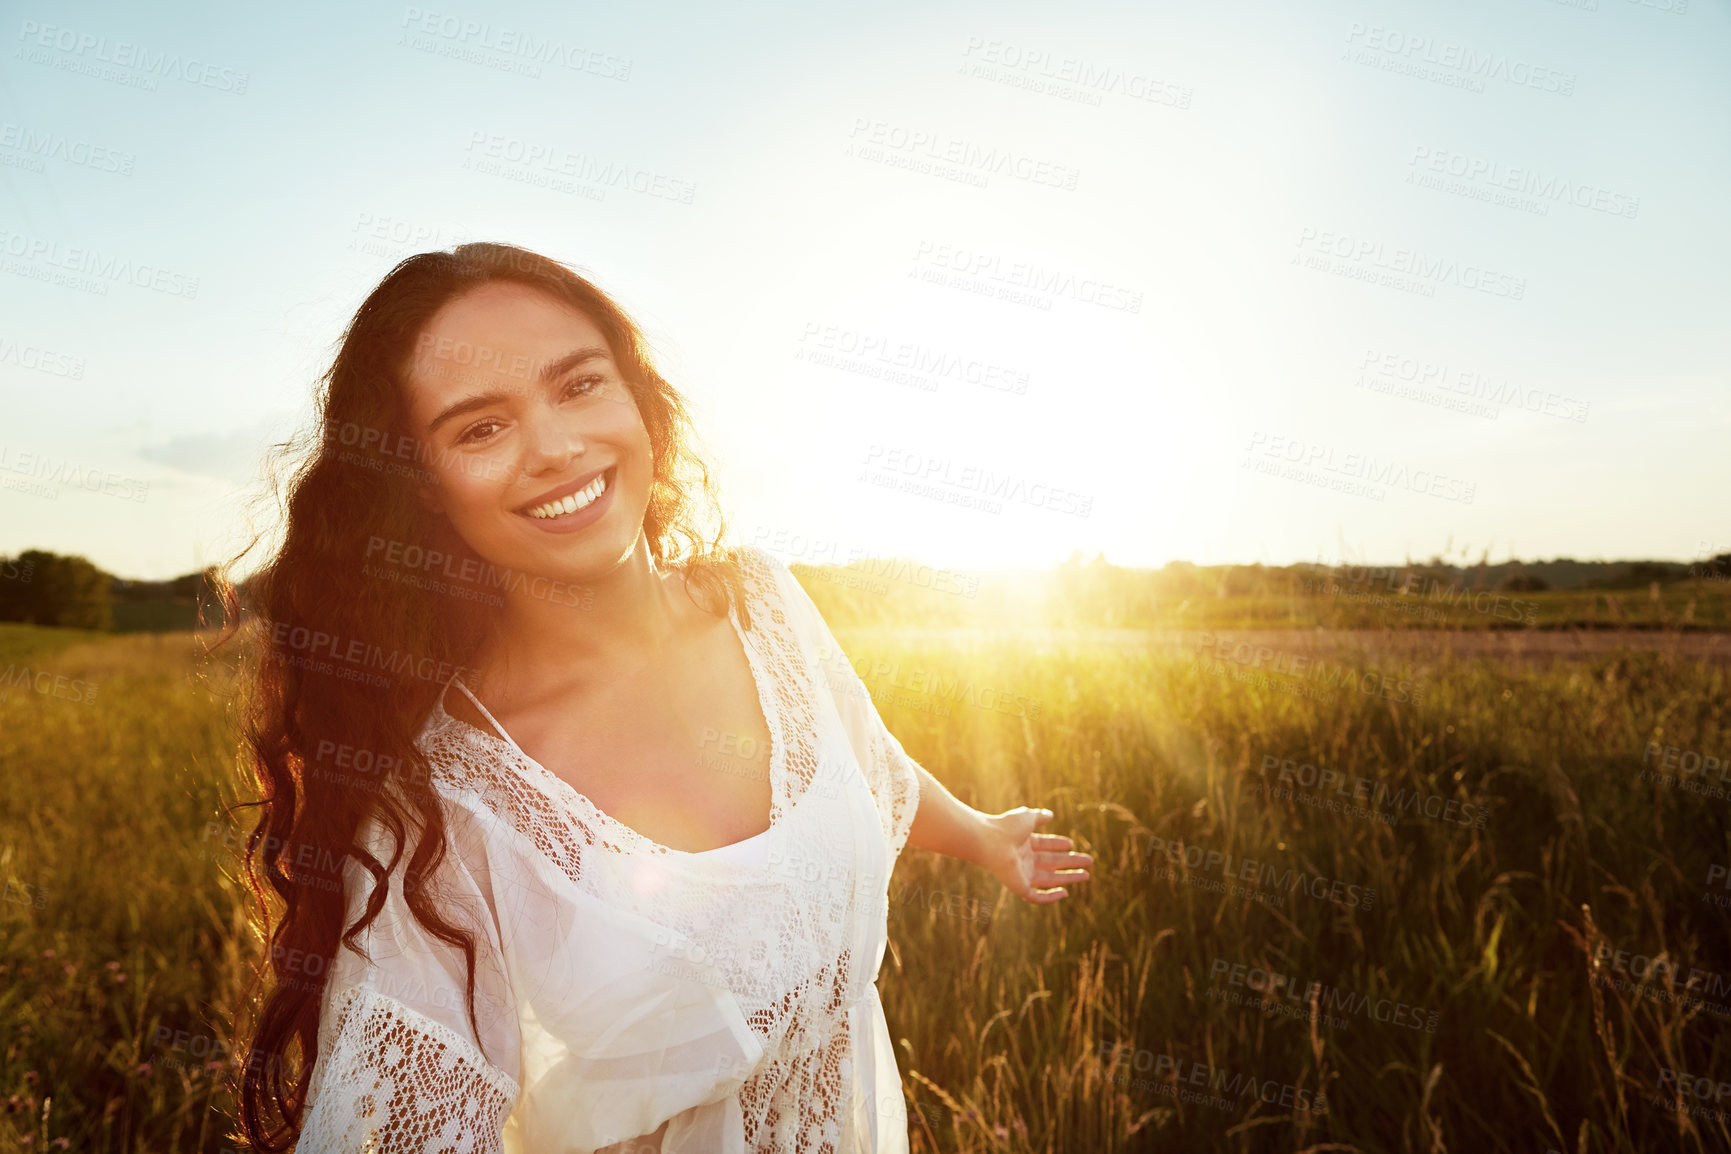 Buy stock photo Portrait of an attractive young woman standing outside in a field